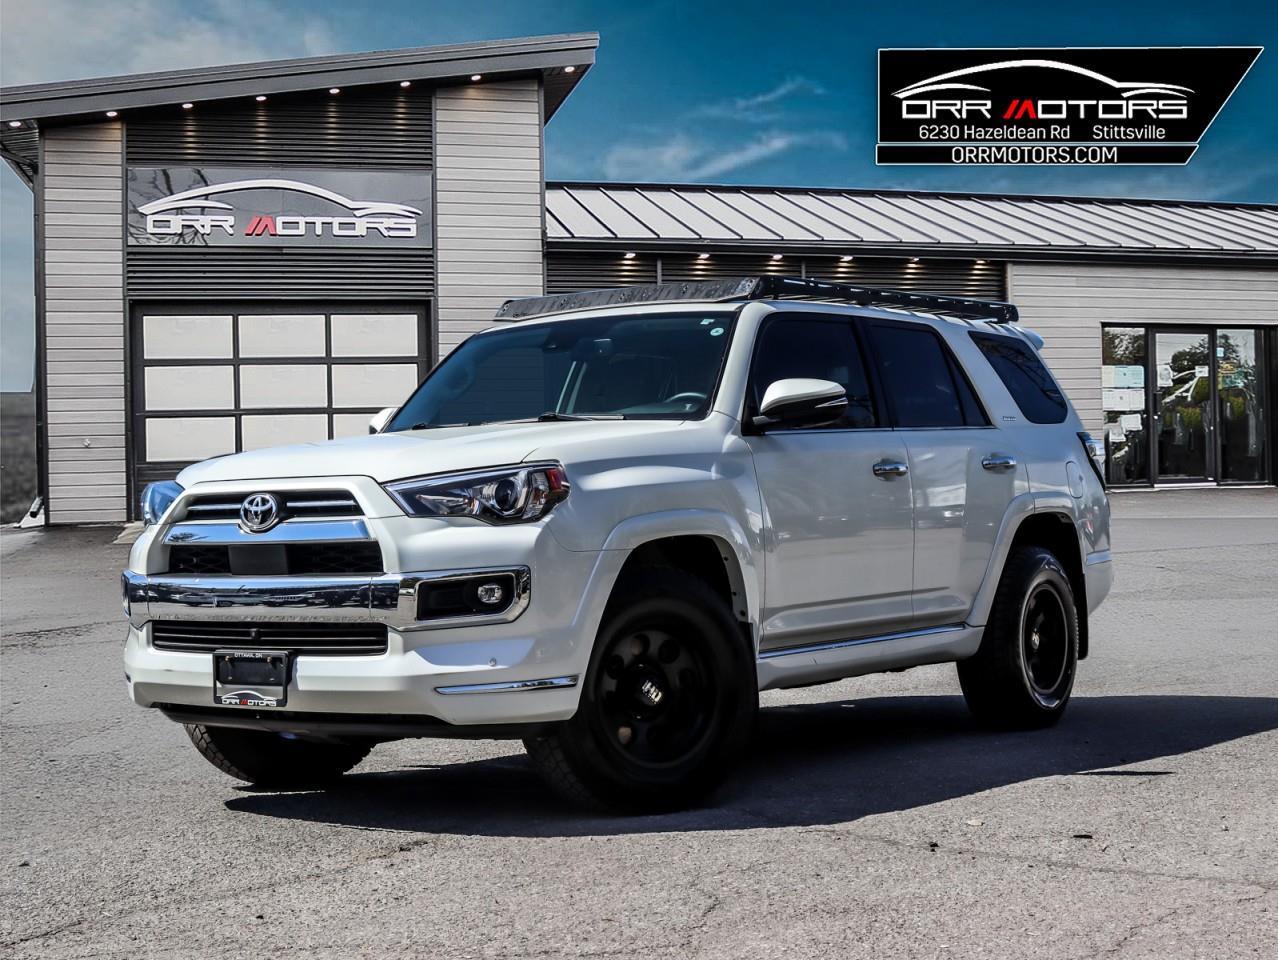 2022 Toyota 4Runner SOLD CERTIFIED AND IN EXCELLENT CONDITION!